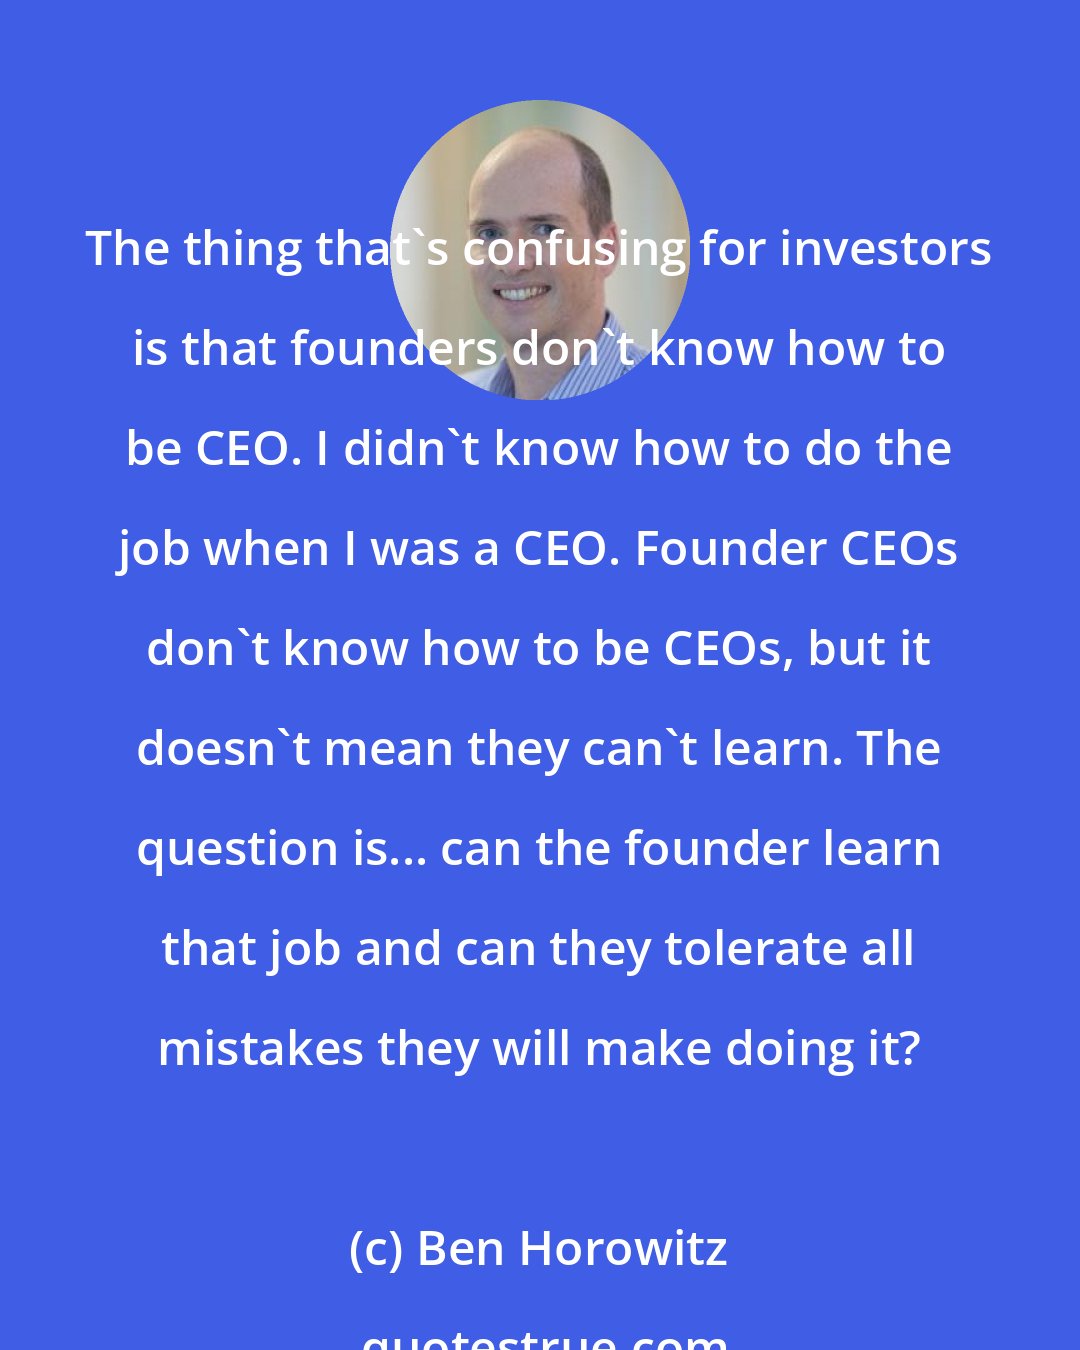 Ben Horowitz: The thing that's confusing for investors is that founders don't know how to be CEO. I didn't know how to do the job when I was a CEO. Founder CEOs don't know how to be CEOs, but it doesn't mean they can't learn. The question is... can the founder learn that job and can they tolerate all mistakes they will make doing it?